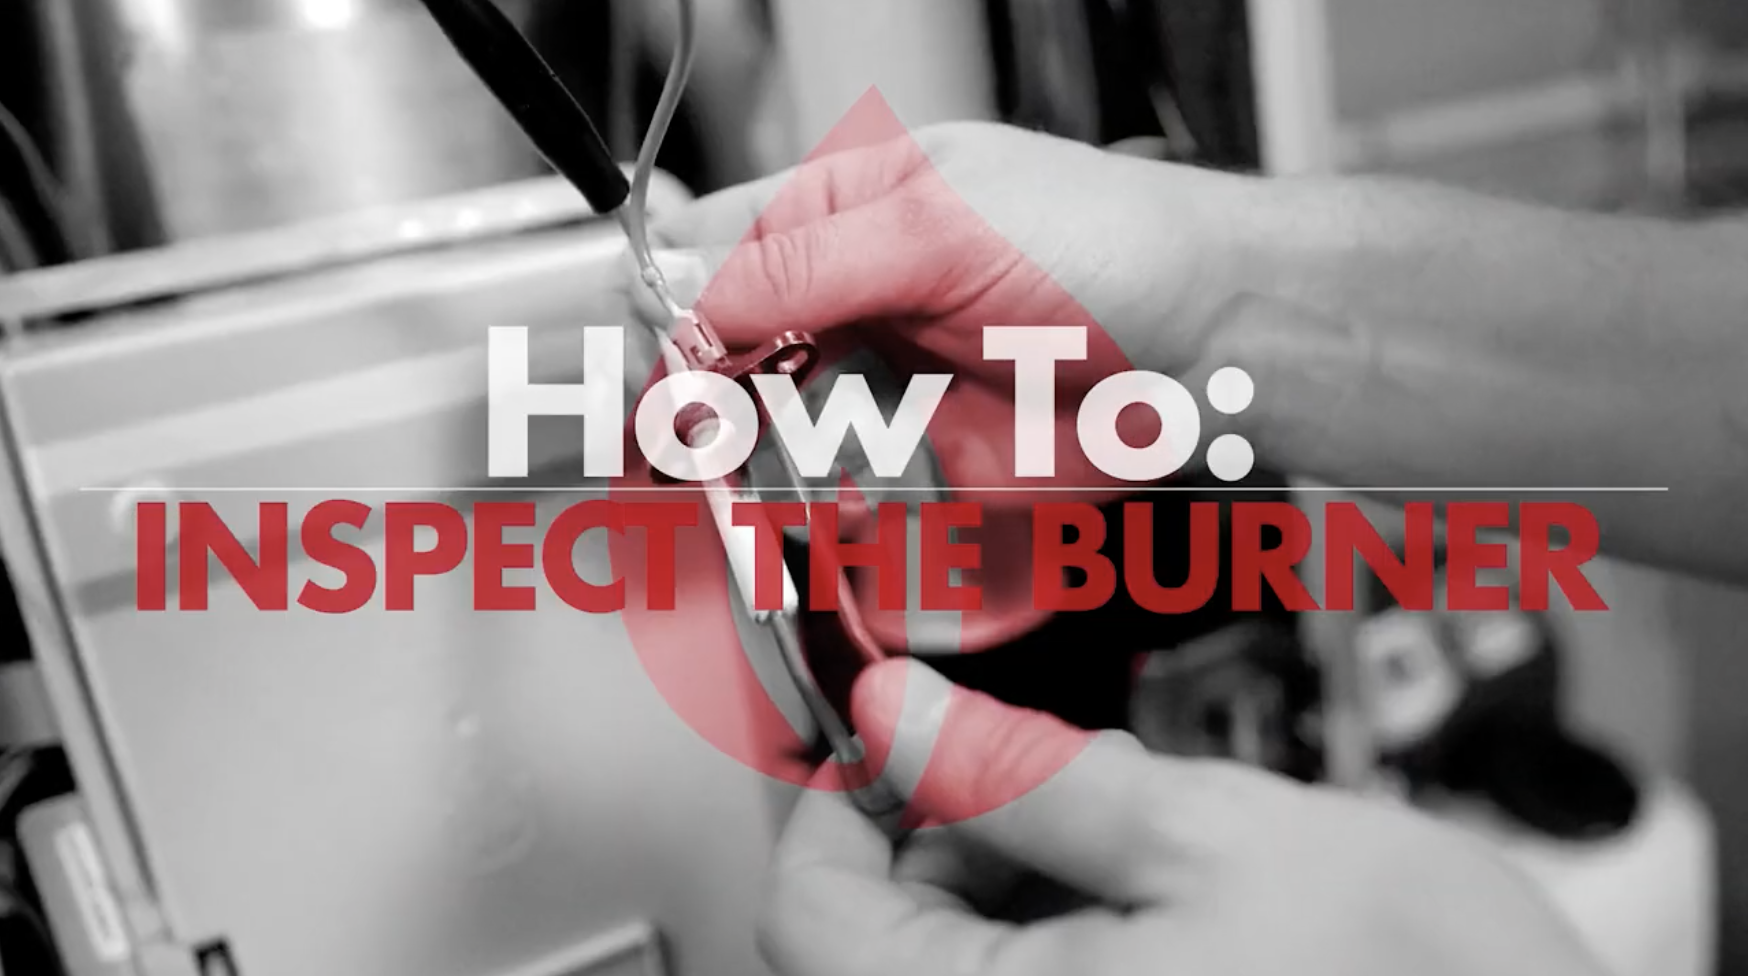 How To: Inspect The Burner